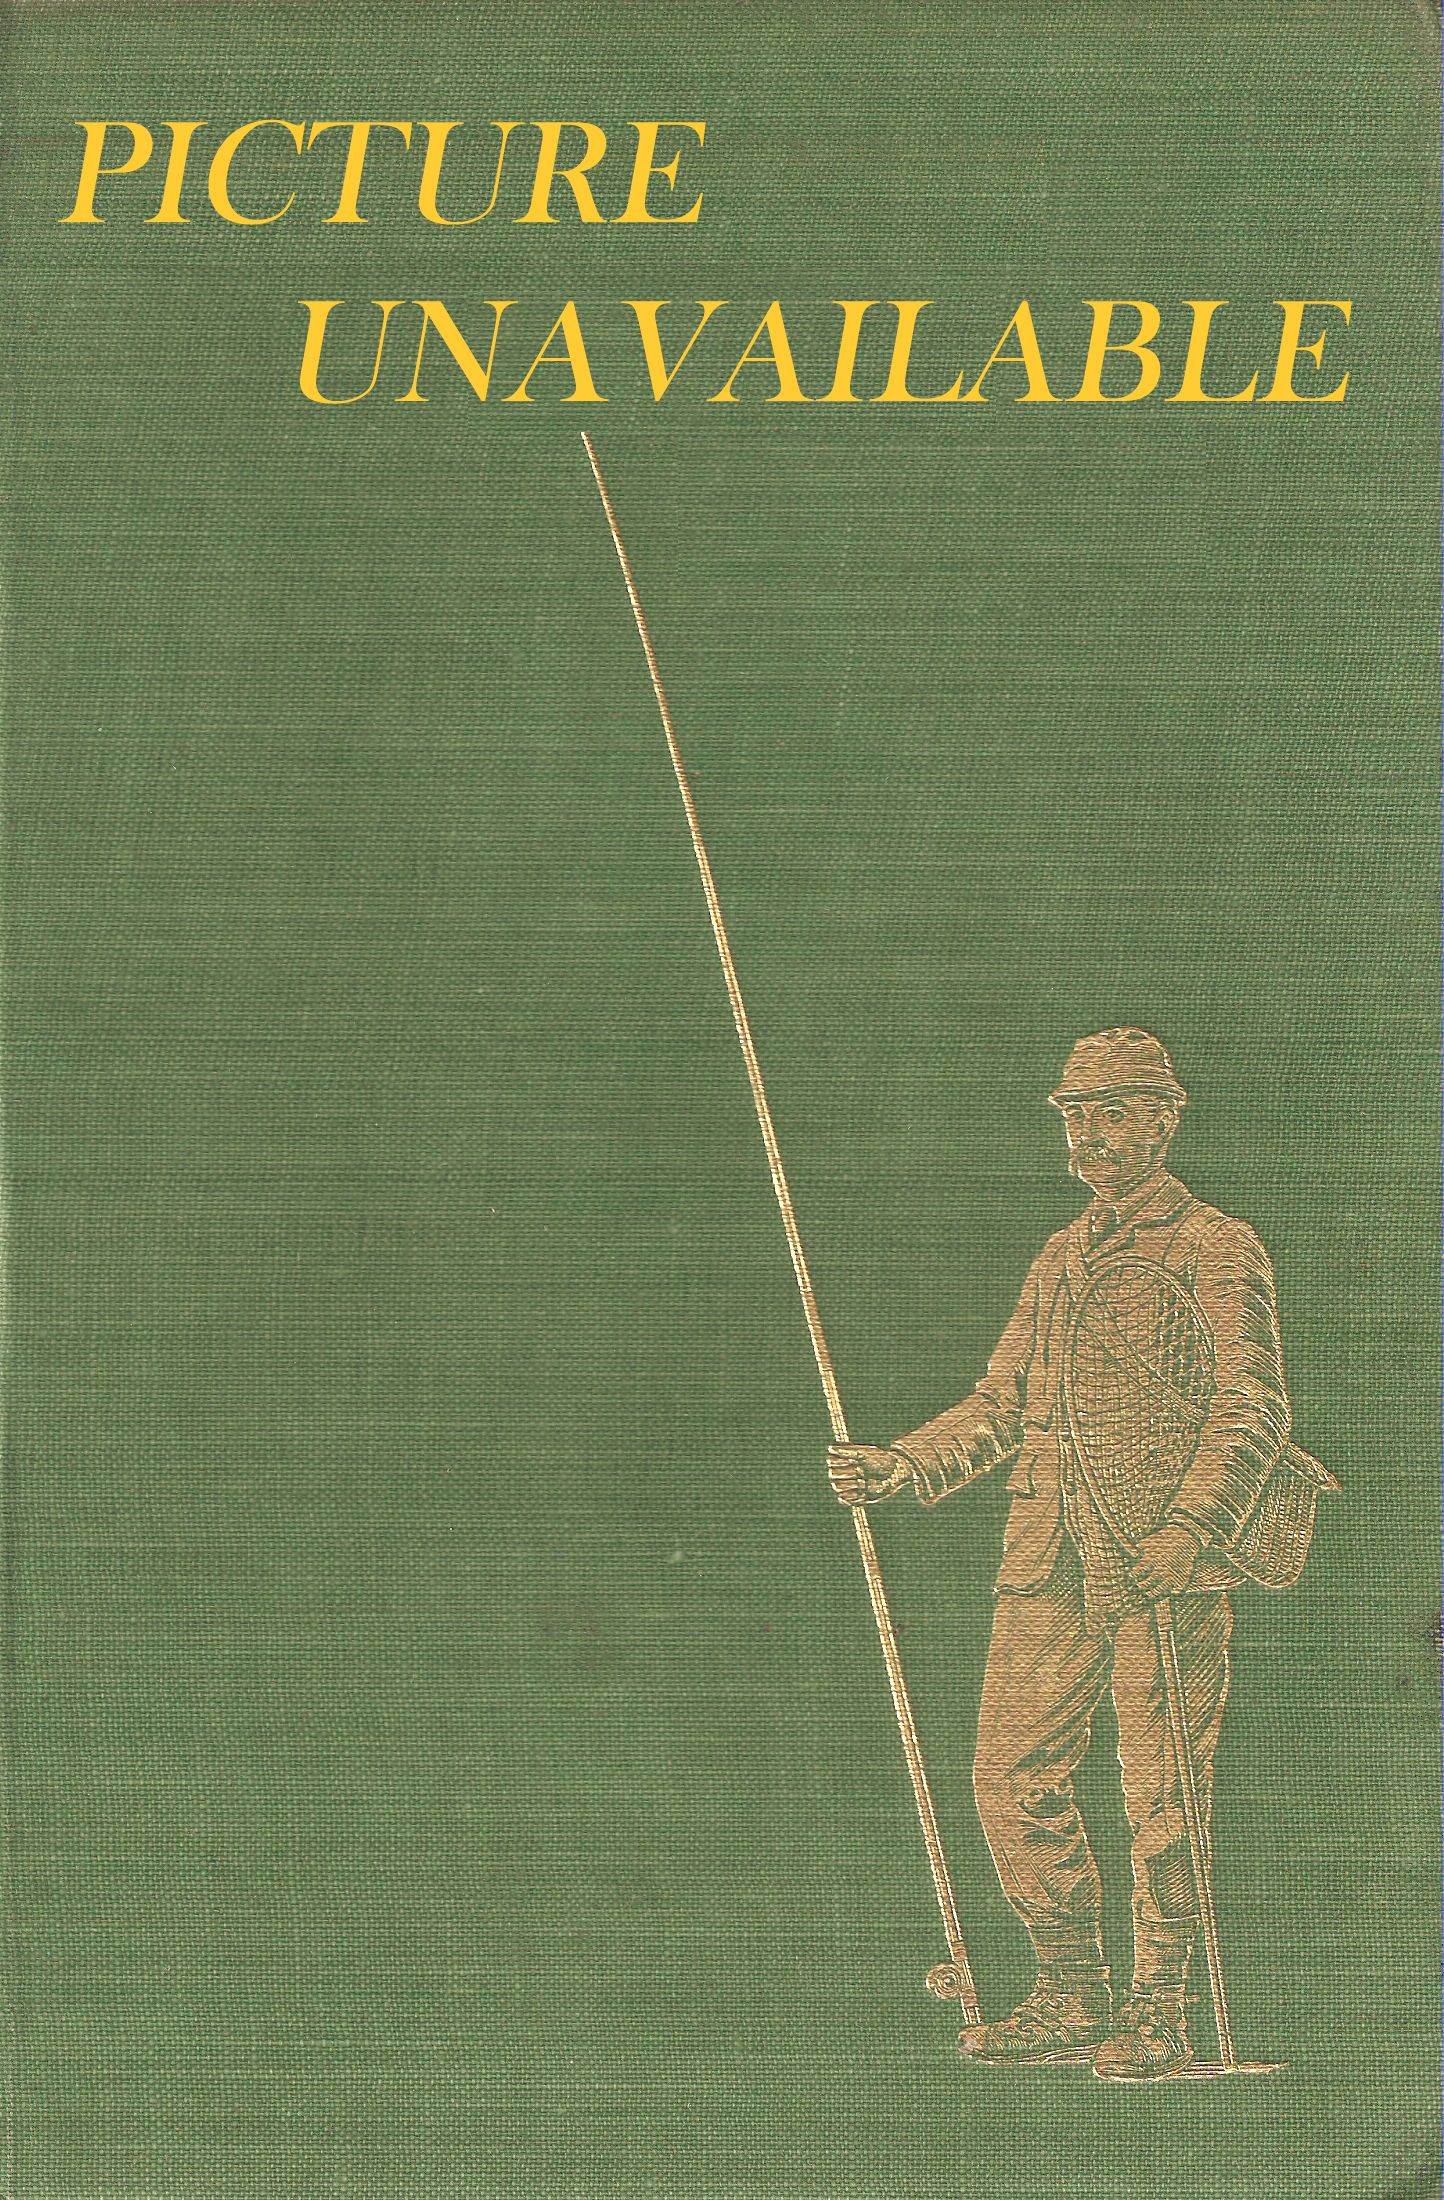 ROUTLEDGE'S HANDBOOK OF FISHING. With illustrations.